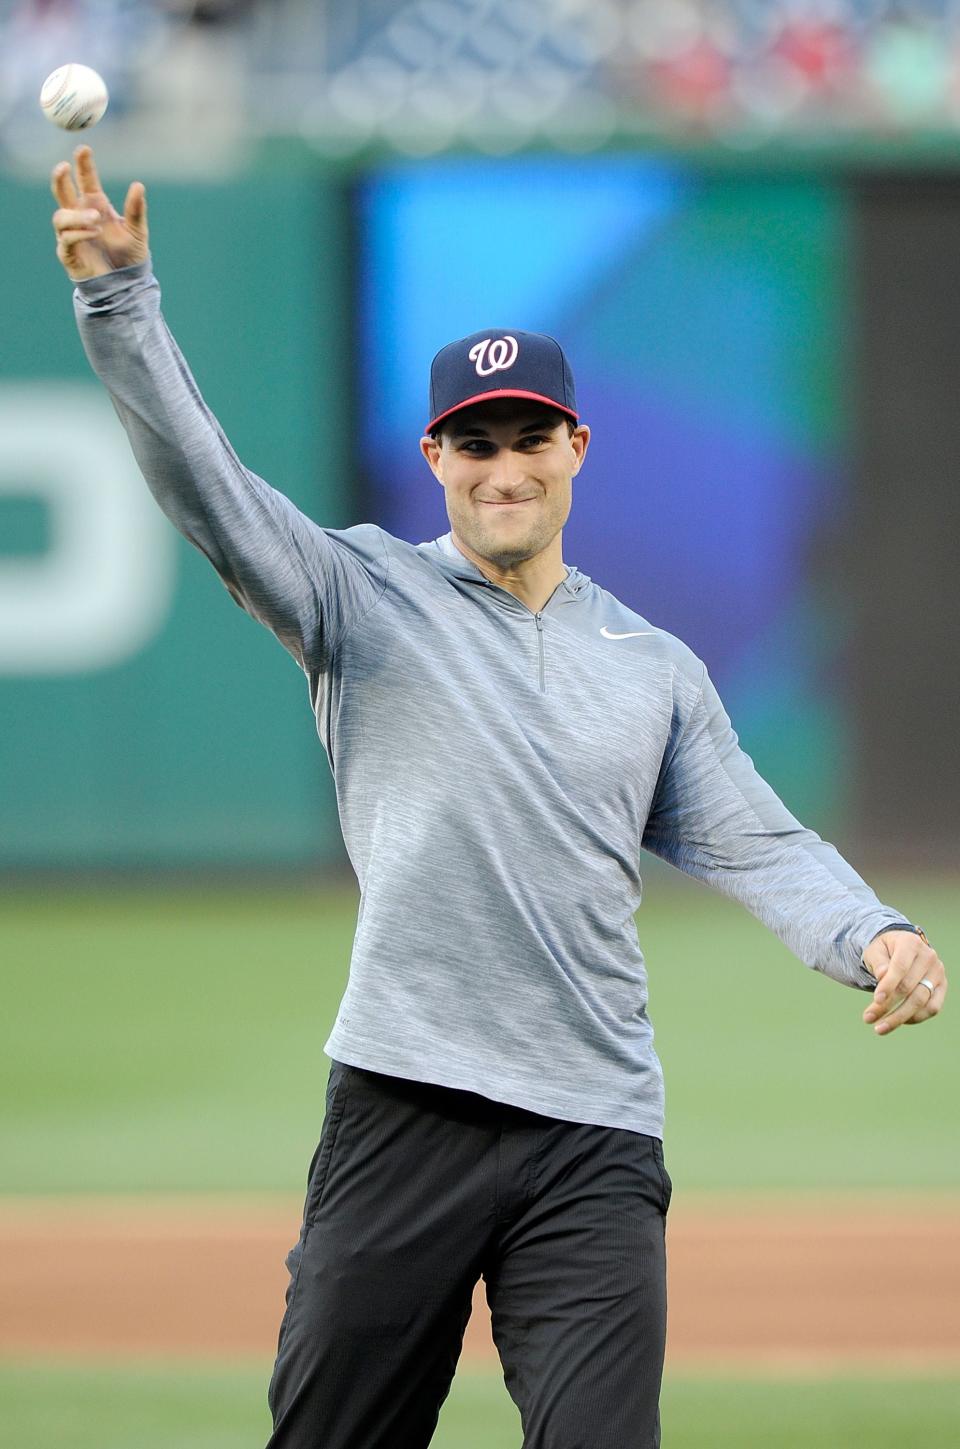 WASHINGTON, DC - MAY 14: Kirk Cousins of the Washington Redskins throws out the first pitch before the game between the Washington Nationals and the Miami Marlins at Nationals Park on May 14, 2016 in Washington, DC.  (Photo by Greg Fiume/Getty Images)